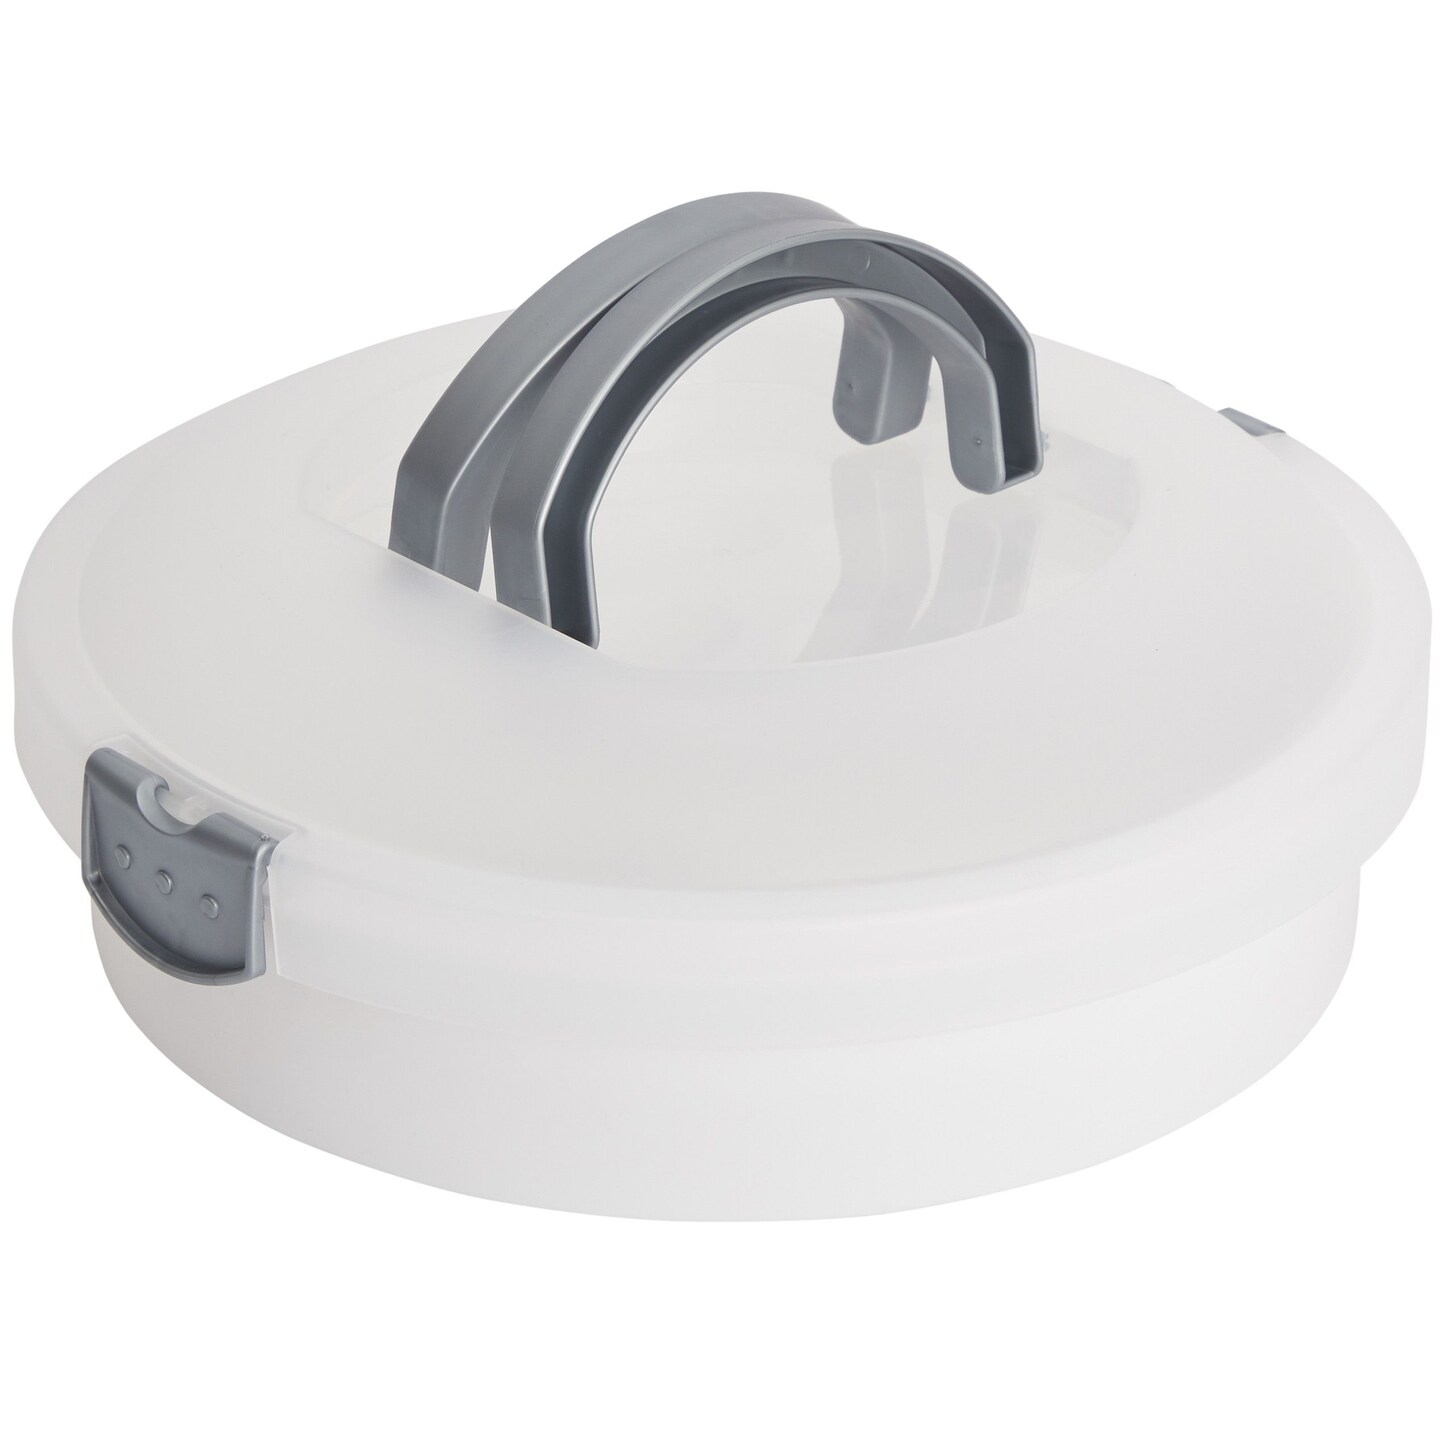 Round Cake Carrier with Lid and Handle for Desserts, Pies, Cupcakes, Deviled Eggs (White, 12 x 4 In)